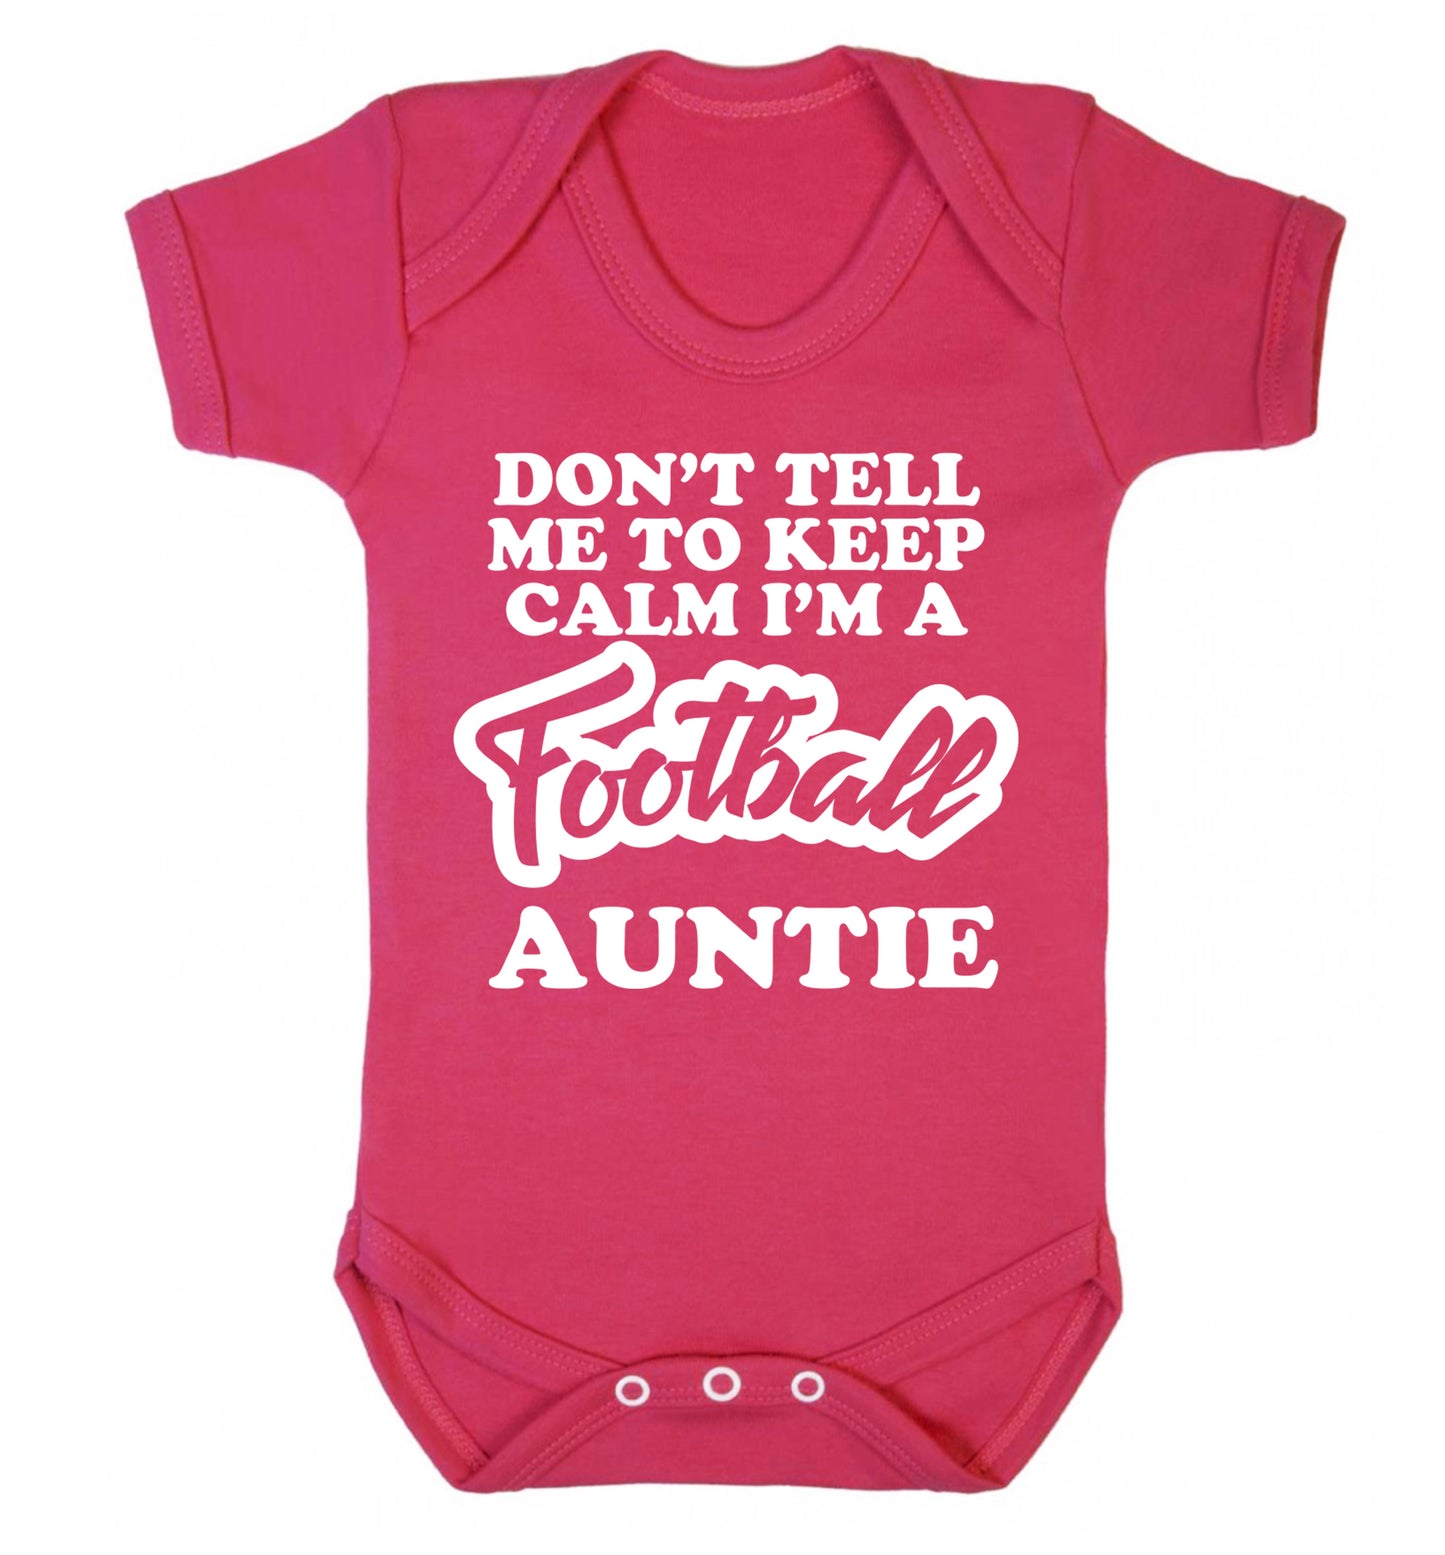 Don't tell me to keep calm I'm a football auntie Baby Vest dark pink 18-24 months